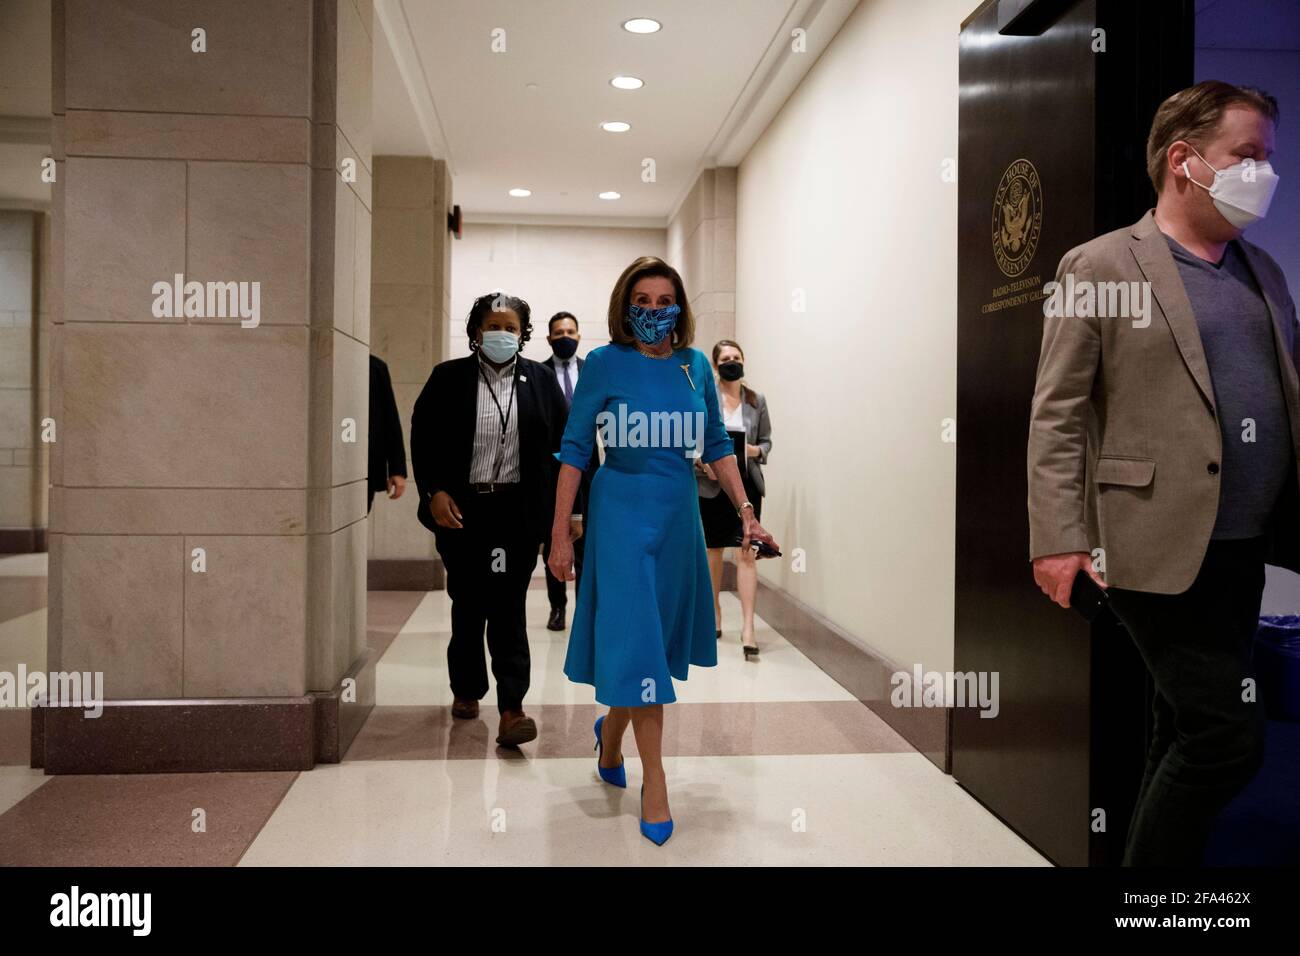 Washington, USA. 22nd Apr, 2021. U.S. House Speaker Nancy Pelosi (C) arrives for a press conference on Capitol Hill in Washington, DC, the United States, April 22, 2021. The U.S. House on Thursday voted to pass a bill that would make Washington, DC the nation's 51st state, a Democratic priority that will face an uphill battle in the Senate for final passage even as the party controls both chambers of Congress. Credit: Ting Shen/Xinhua/Alamy Live News Stock Photo